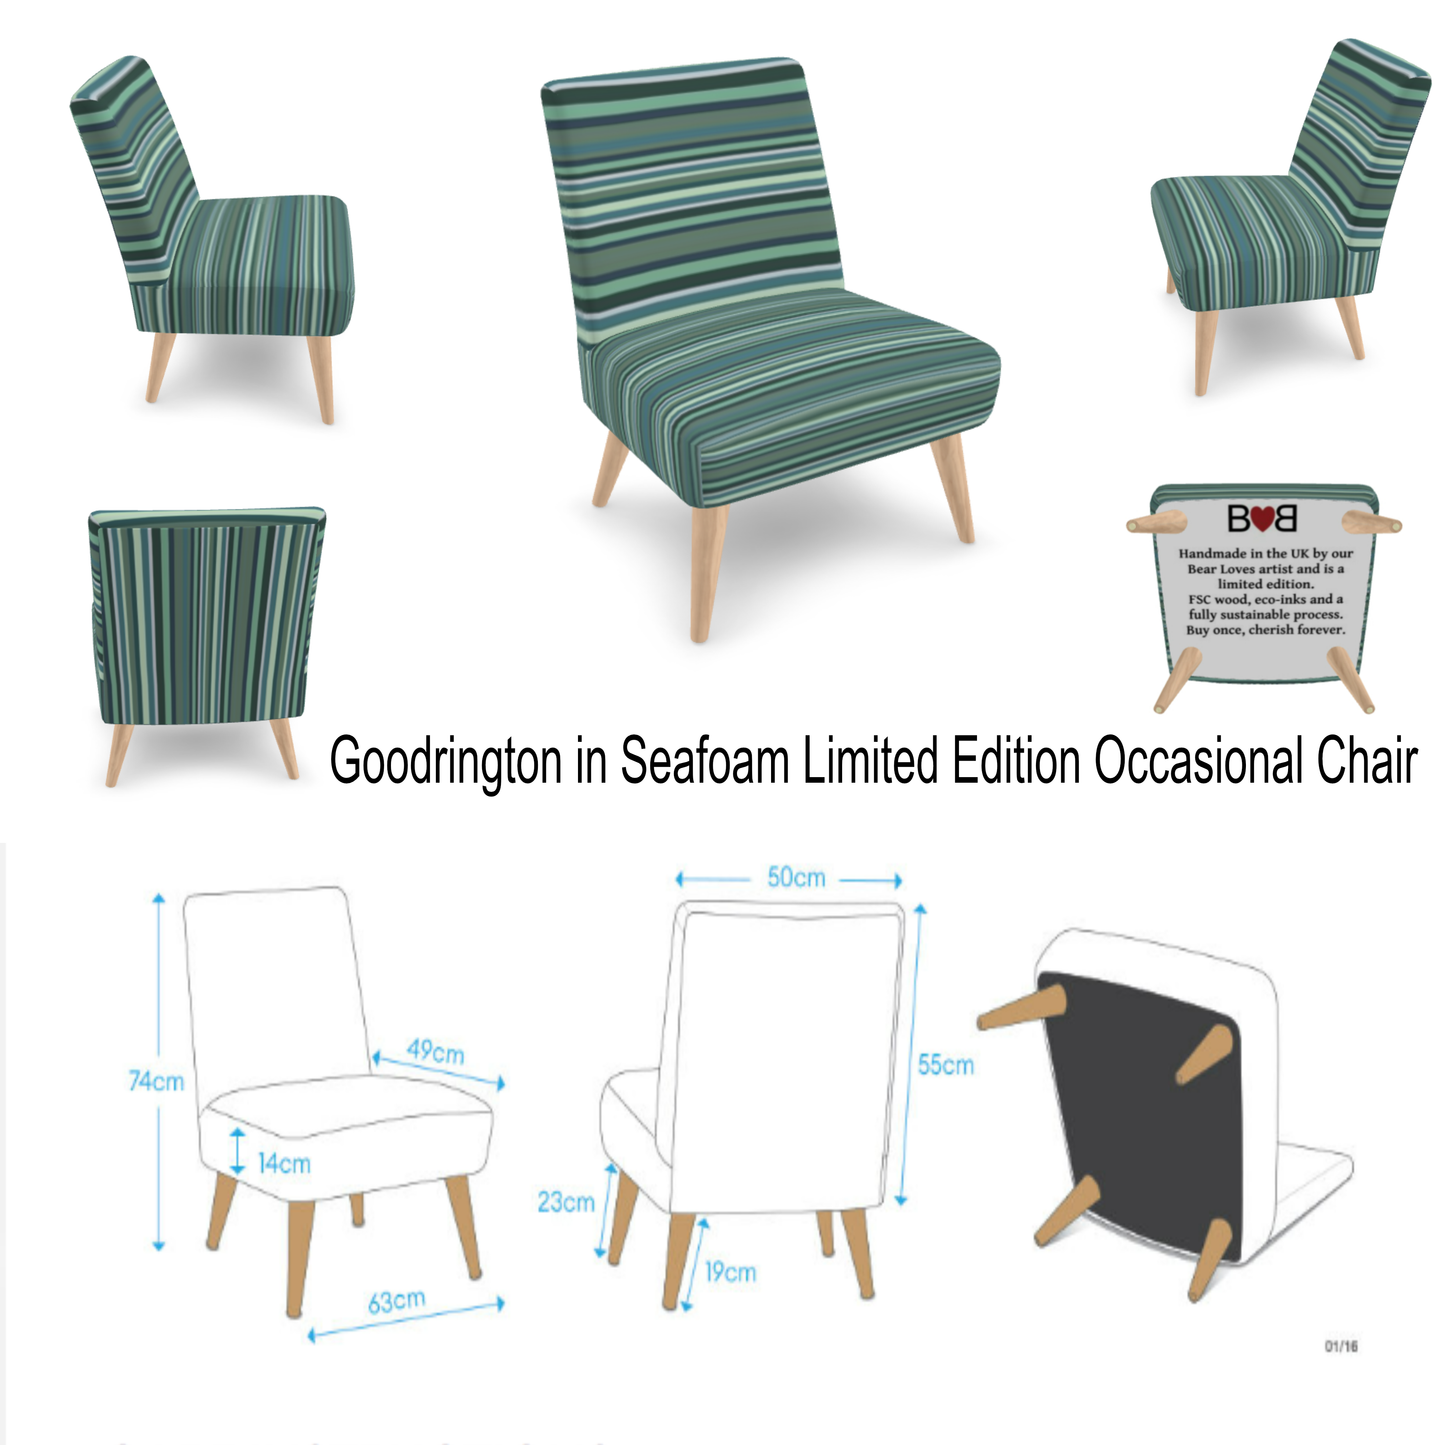 Goodrington in Seafoam, Limited Edition, Exclusively Designed Upholstered Occasional Chair